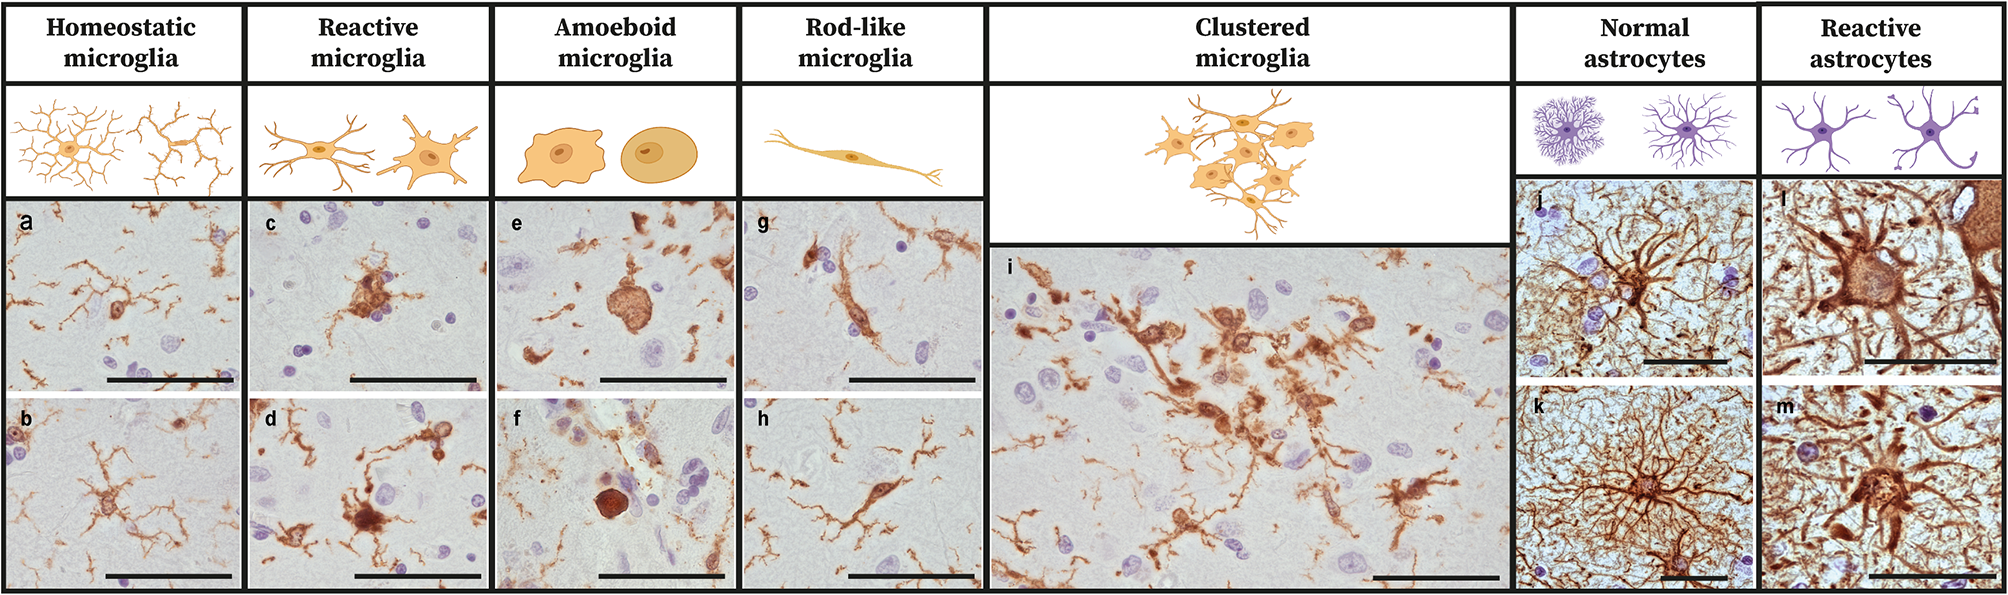 Neuroinflammation is associated with Alzheimer’s disease co-pathology in dementia with Lewy bodies